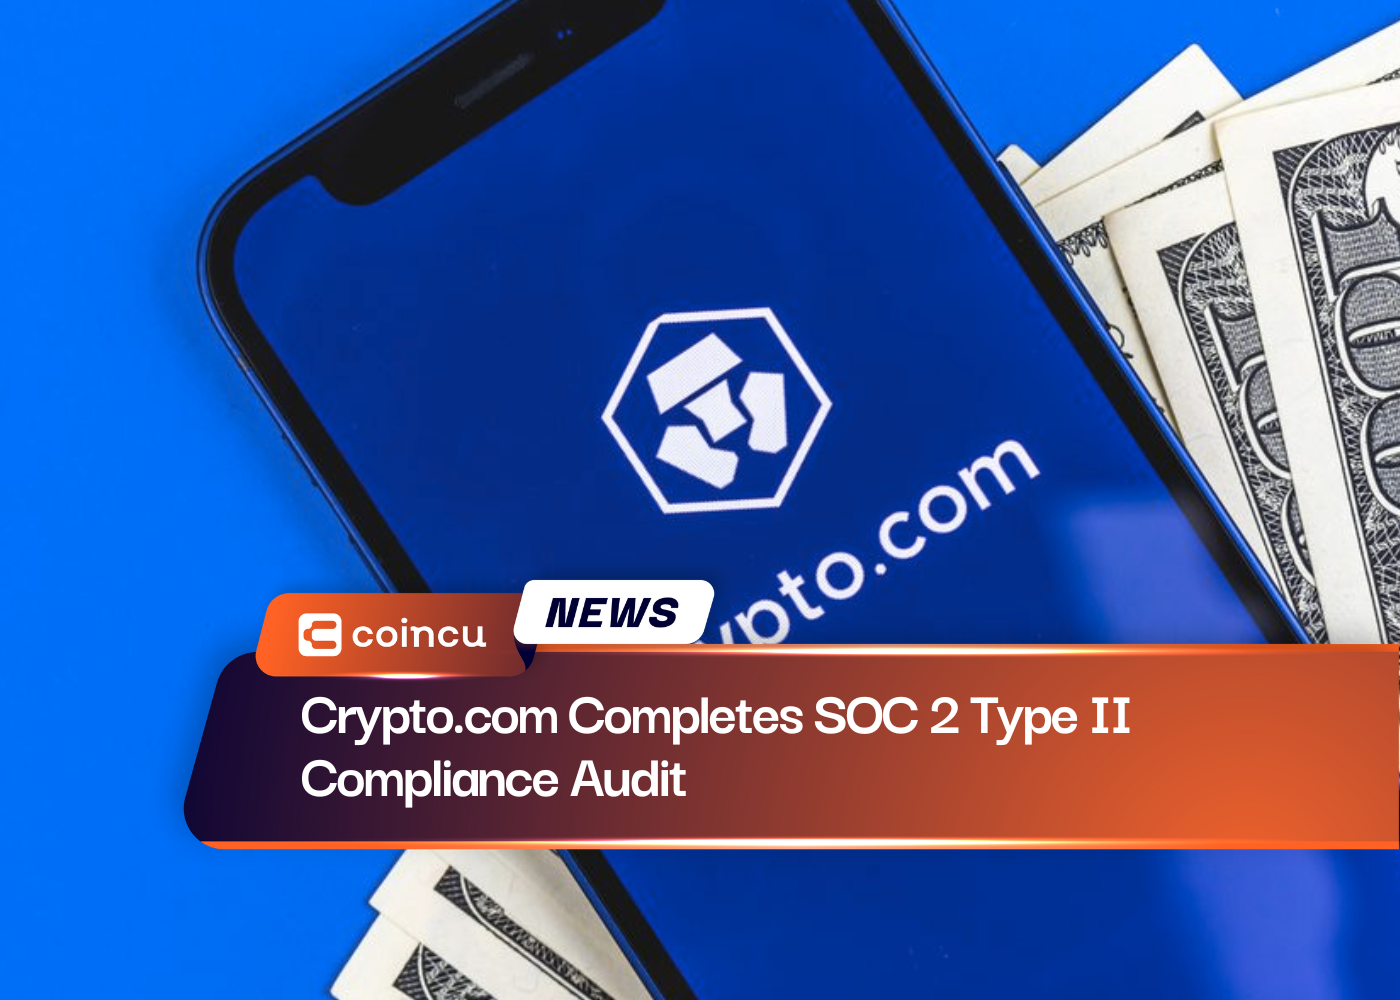 Crypto.com Completes SOC 2 Type II Compliance Audit